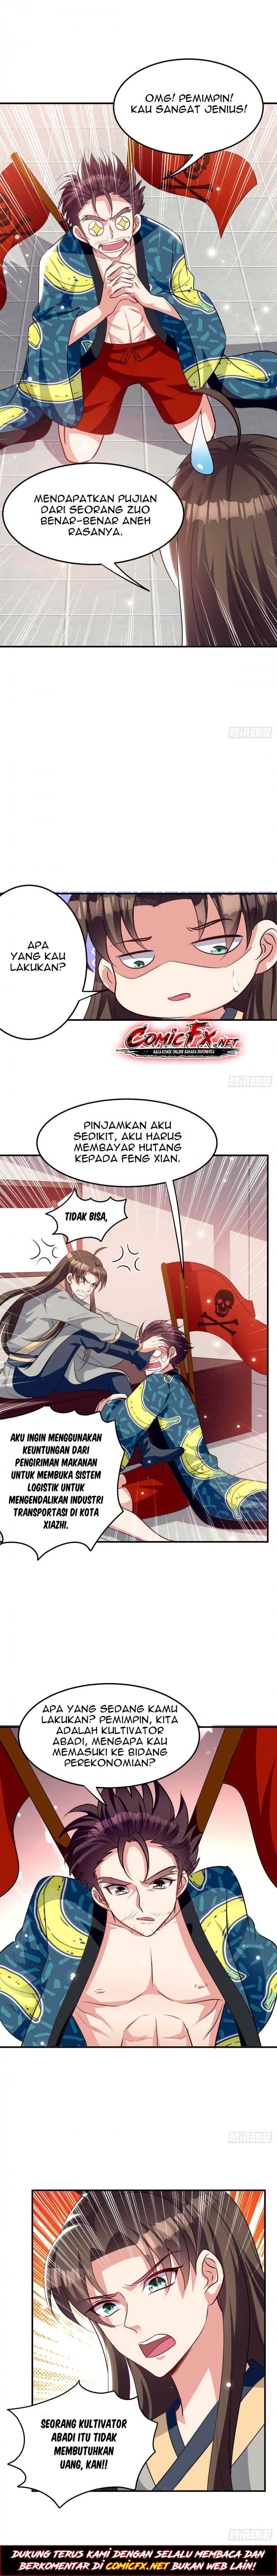 Outsider Super Son In Law Chapter 33